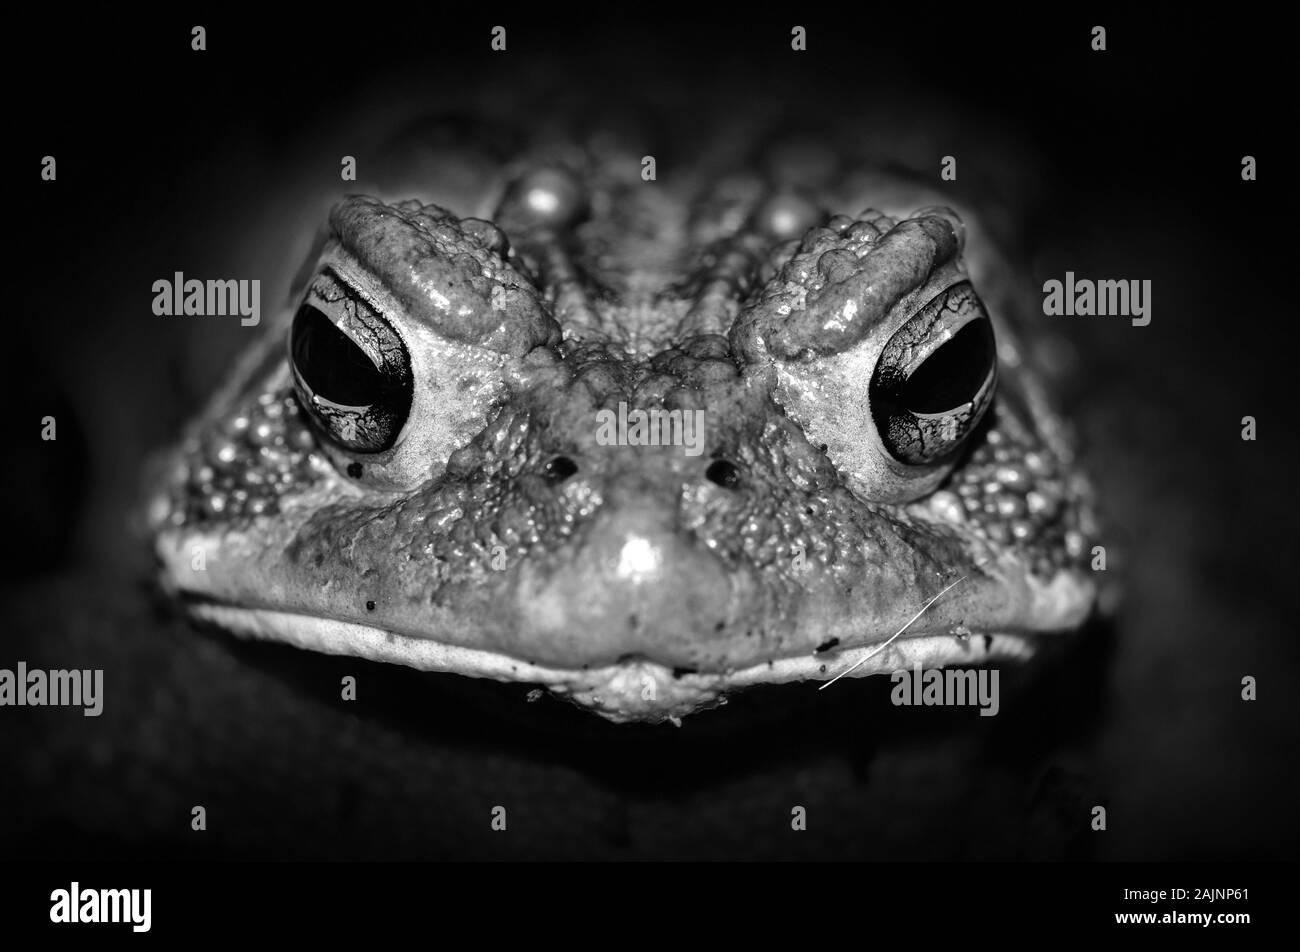 Closeup black and white macro of toad eyes isolated in dark shadows Stock Photo